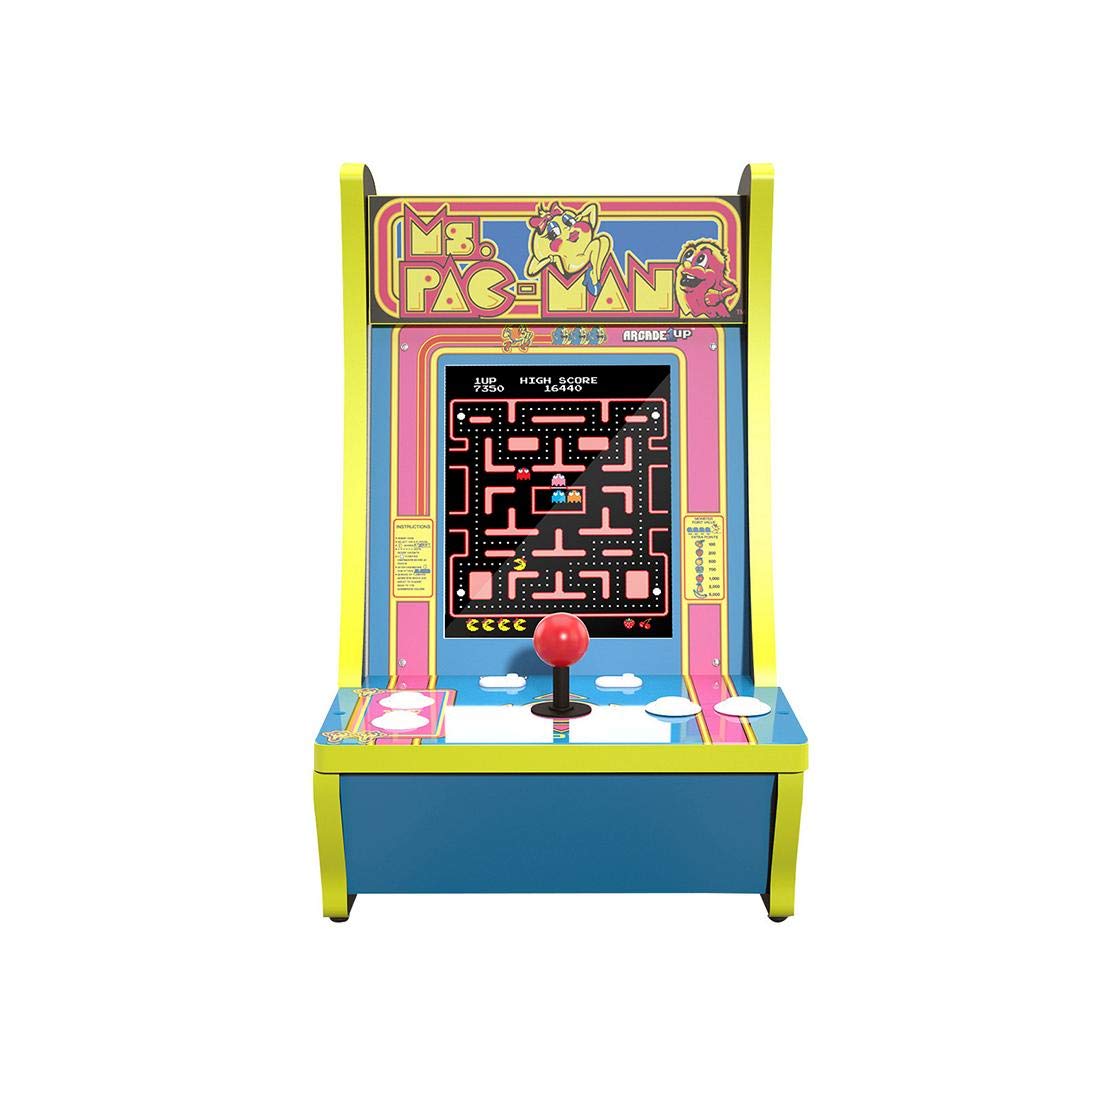 MSP Arcade1Up MS.Pac-Man Counter-Cade - 4 Games in 1